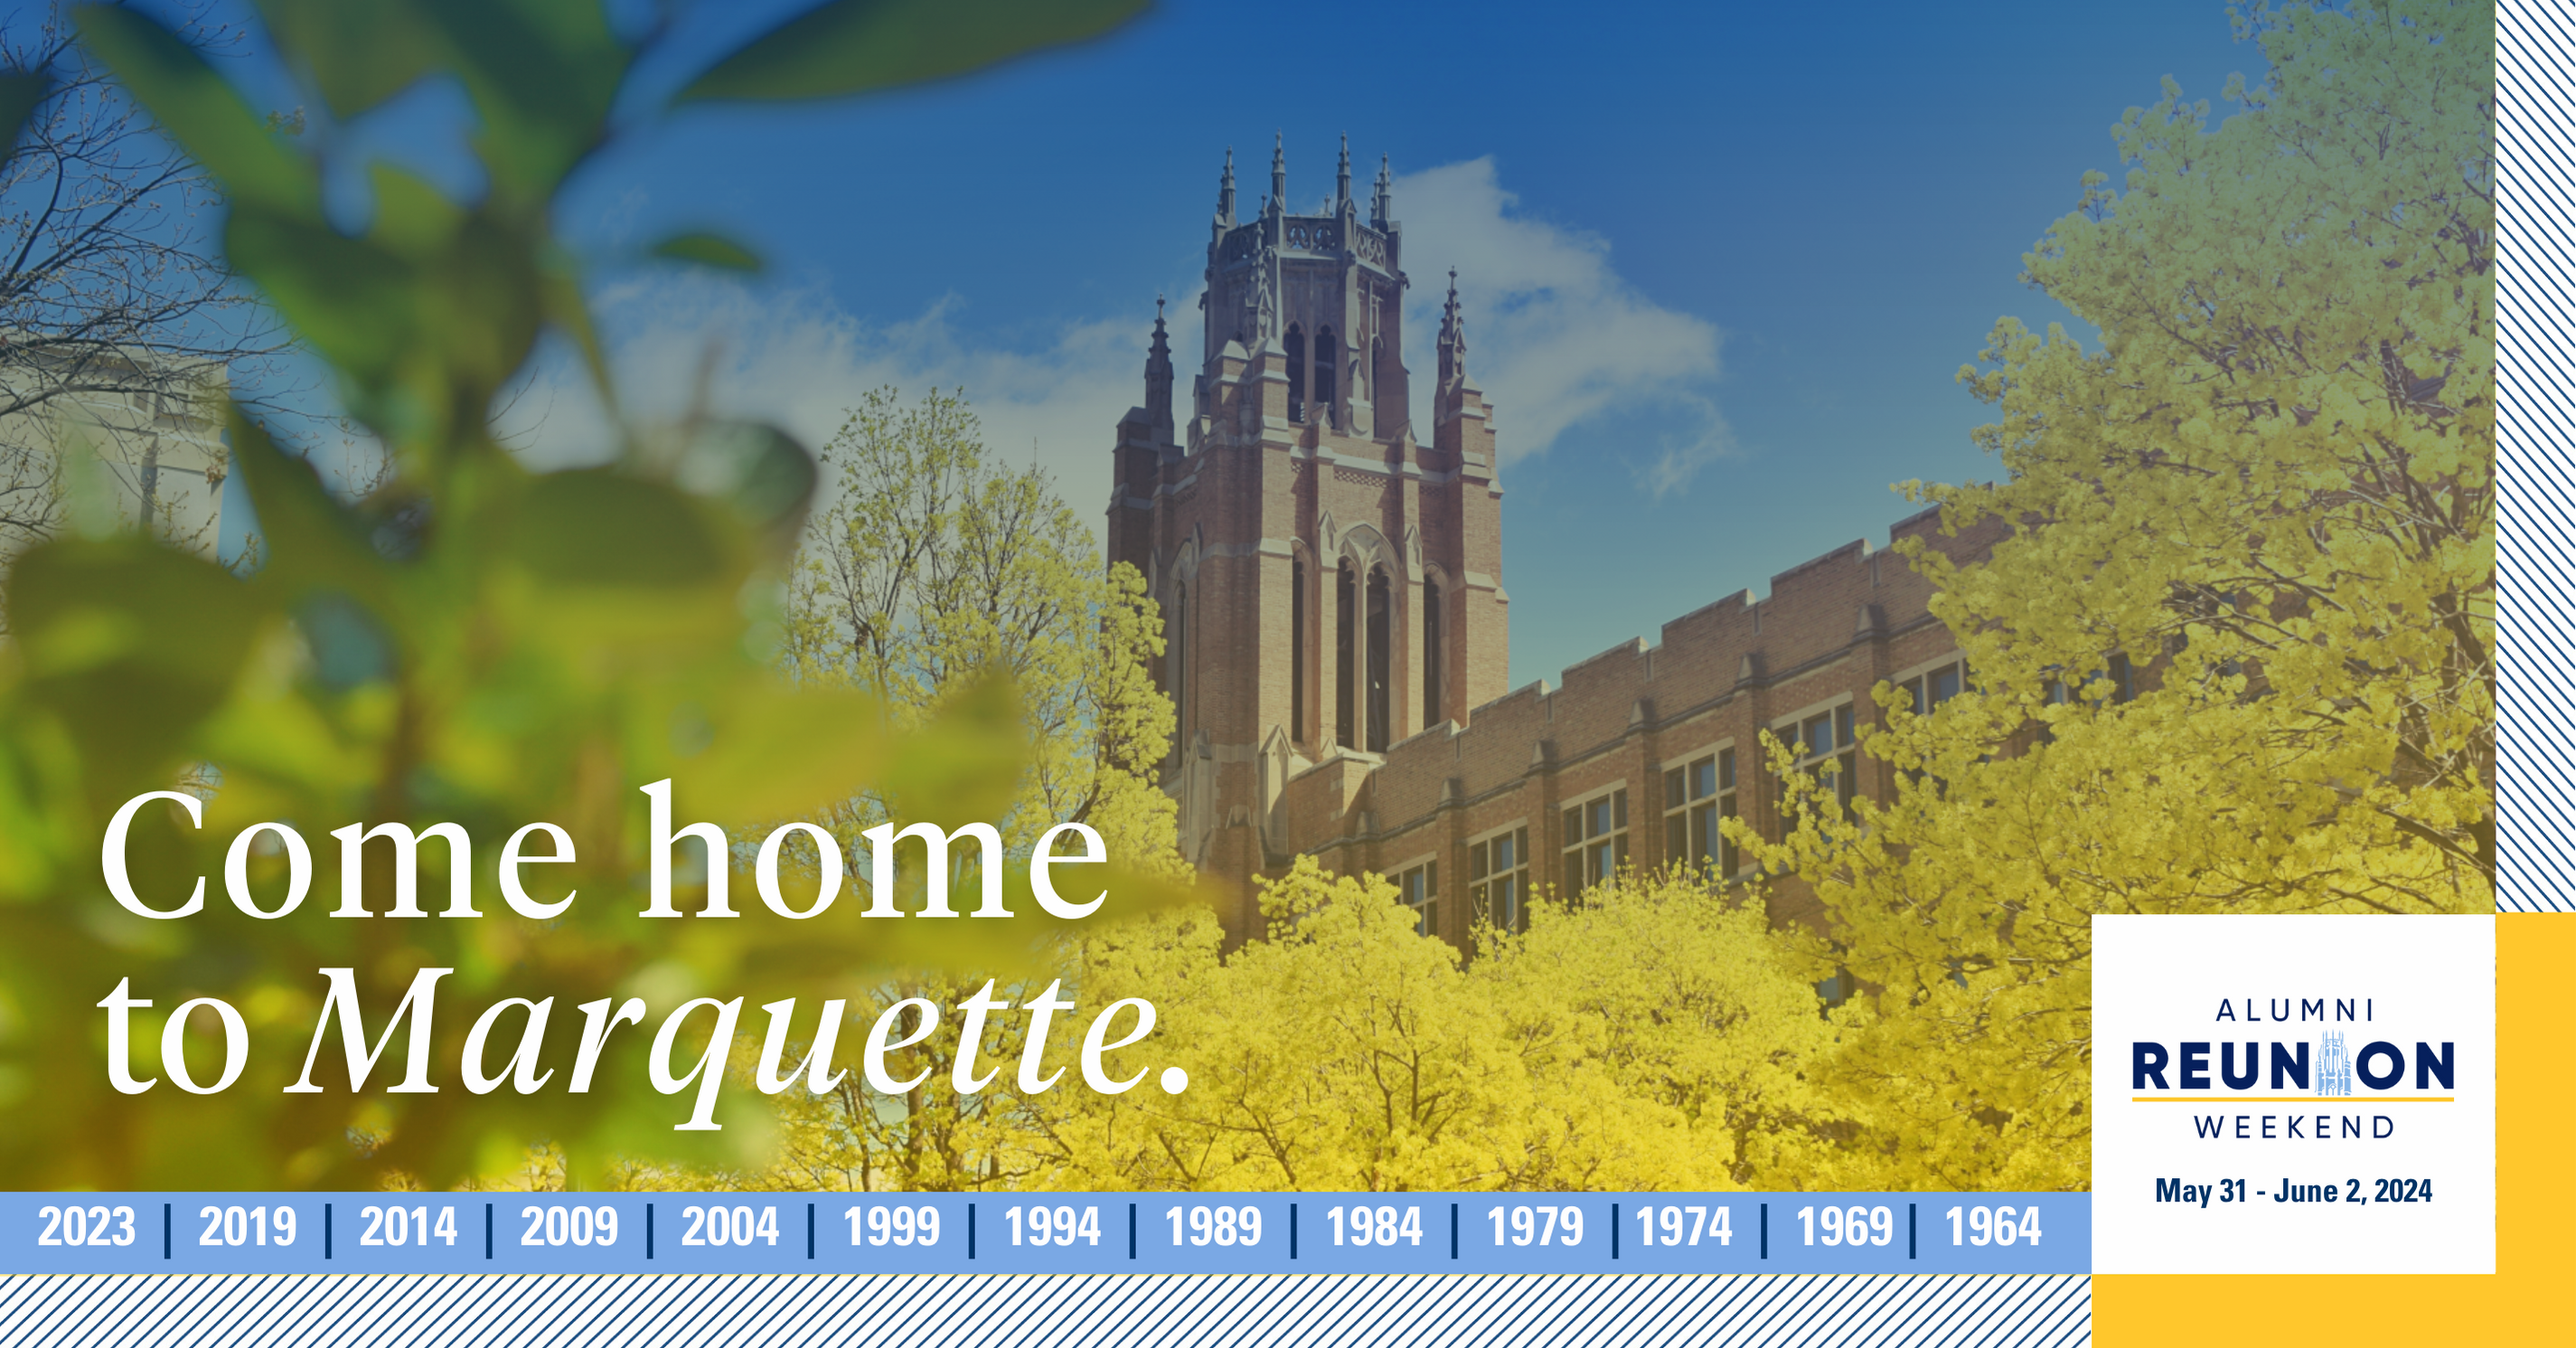 Come home to Marquette for Alumni Reunion Weekend.